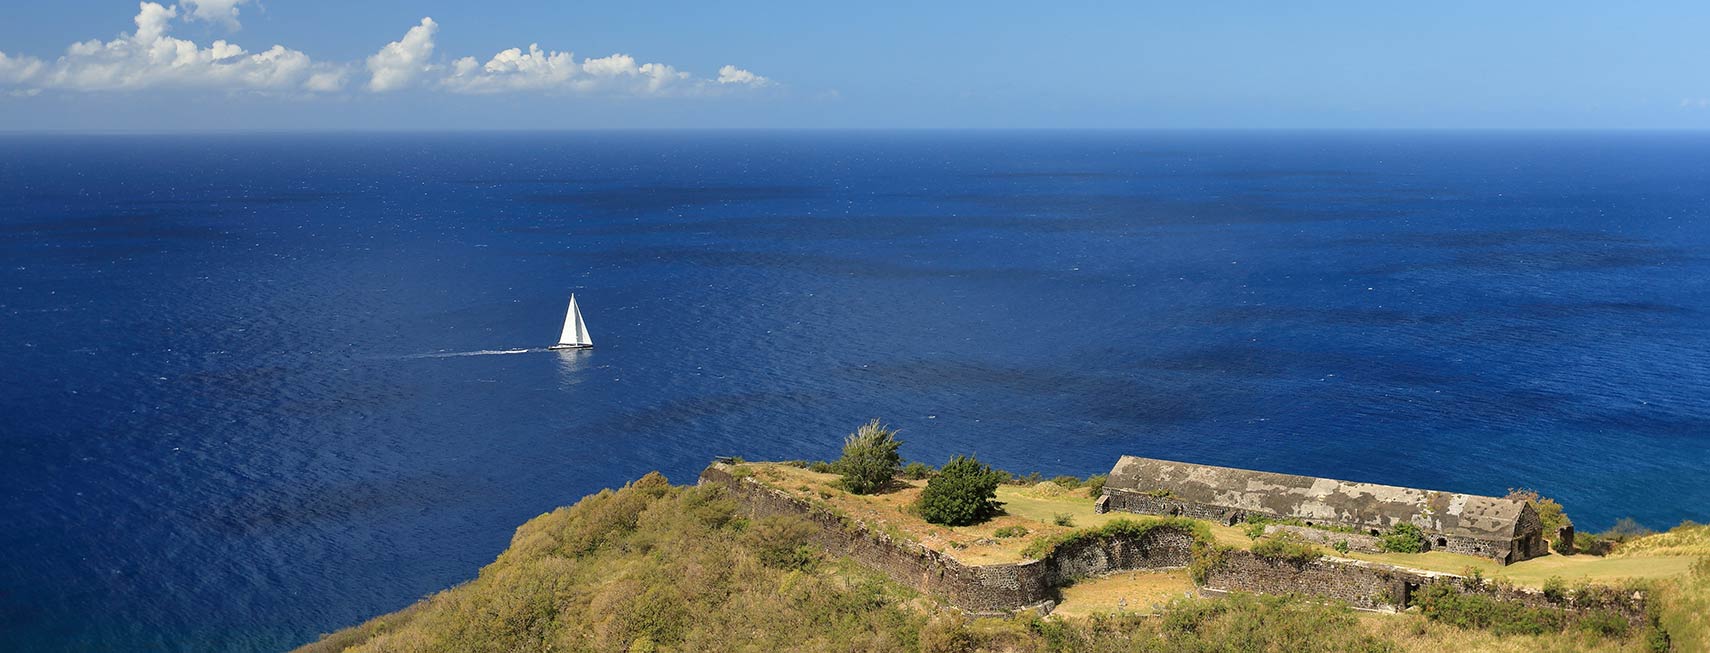 Brimstone Hill Fortress on the island of St. Kitts